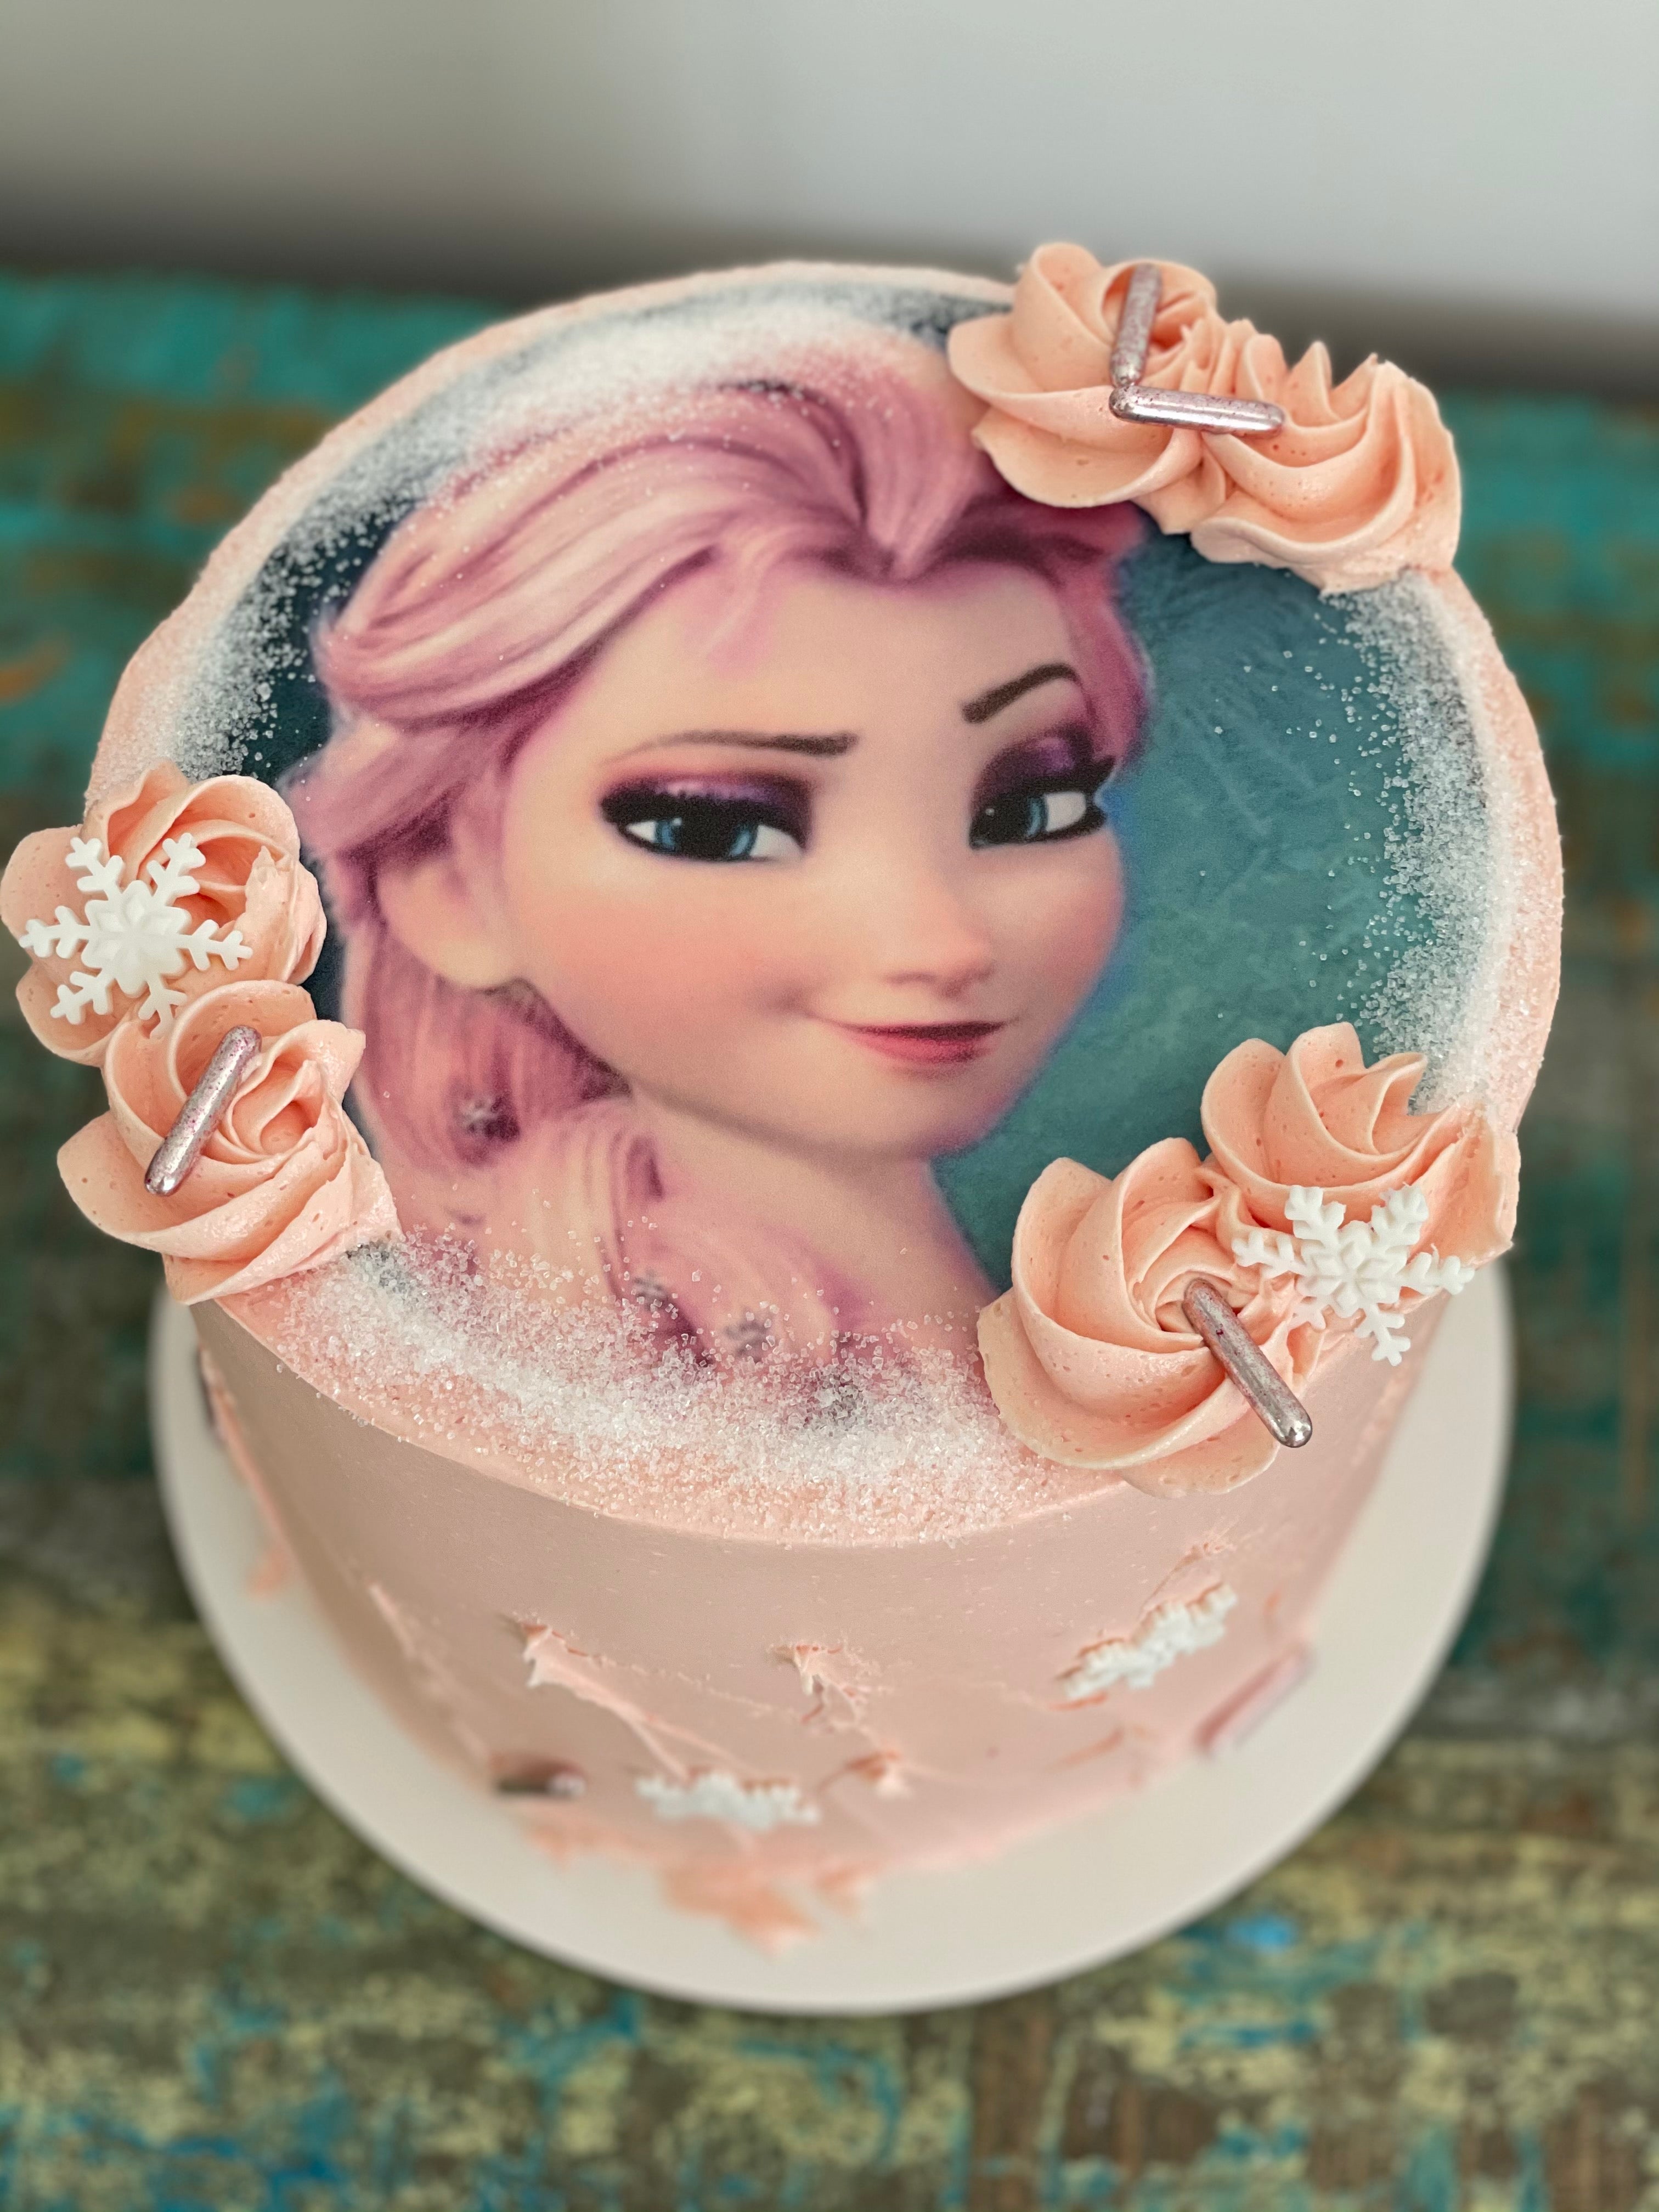 How To Make An Easy Elsa Cake With A Doll, Squished Cake And Some Glitter  Spray! - Mum's Creative Cupboard